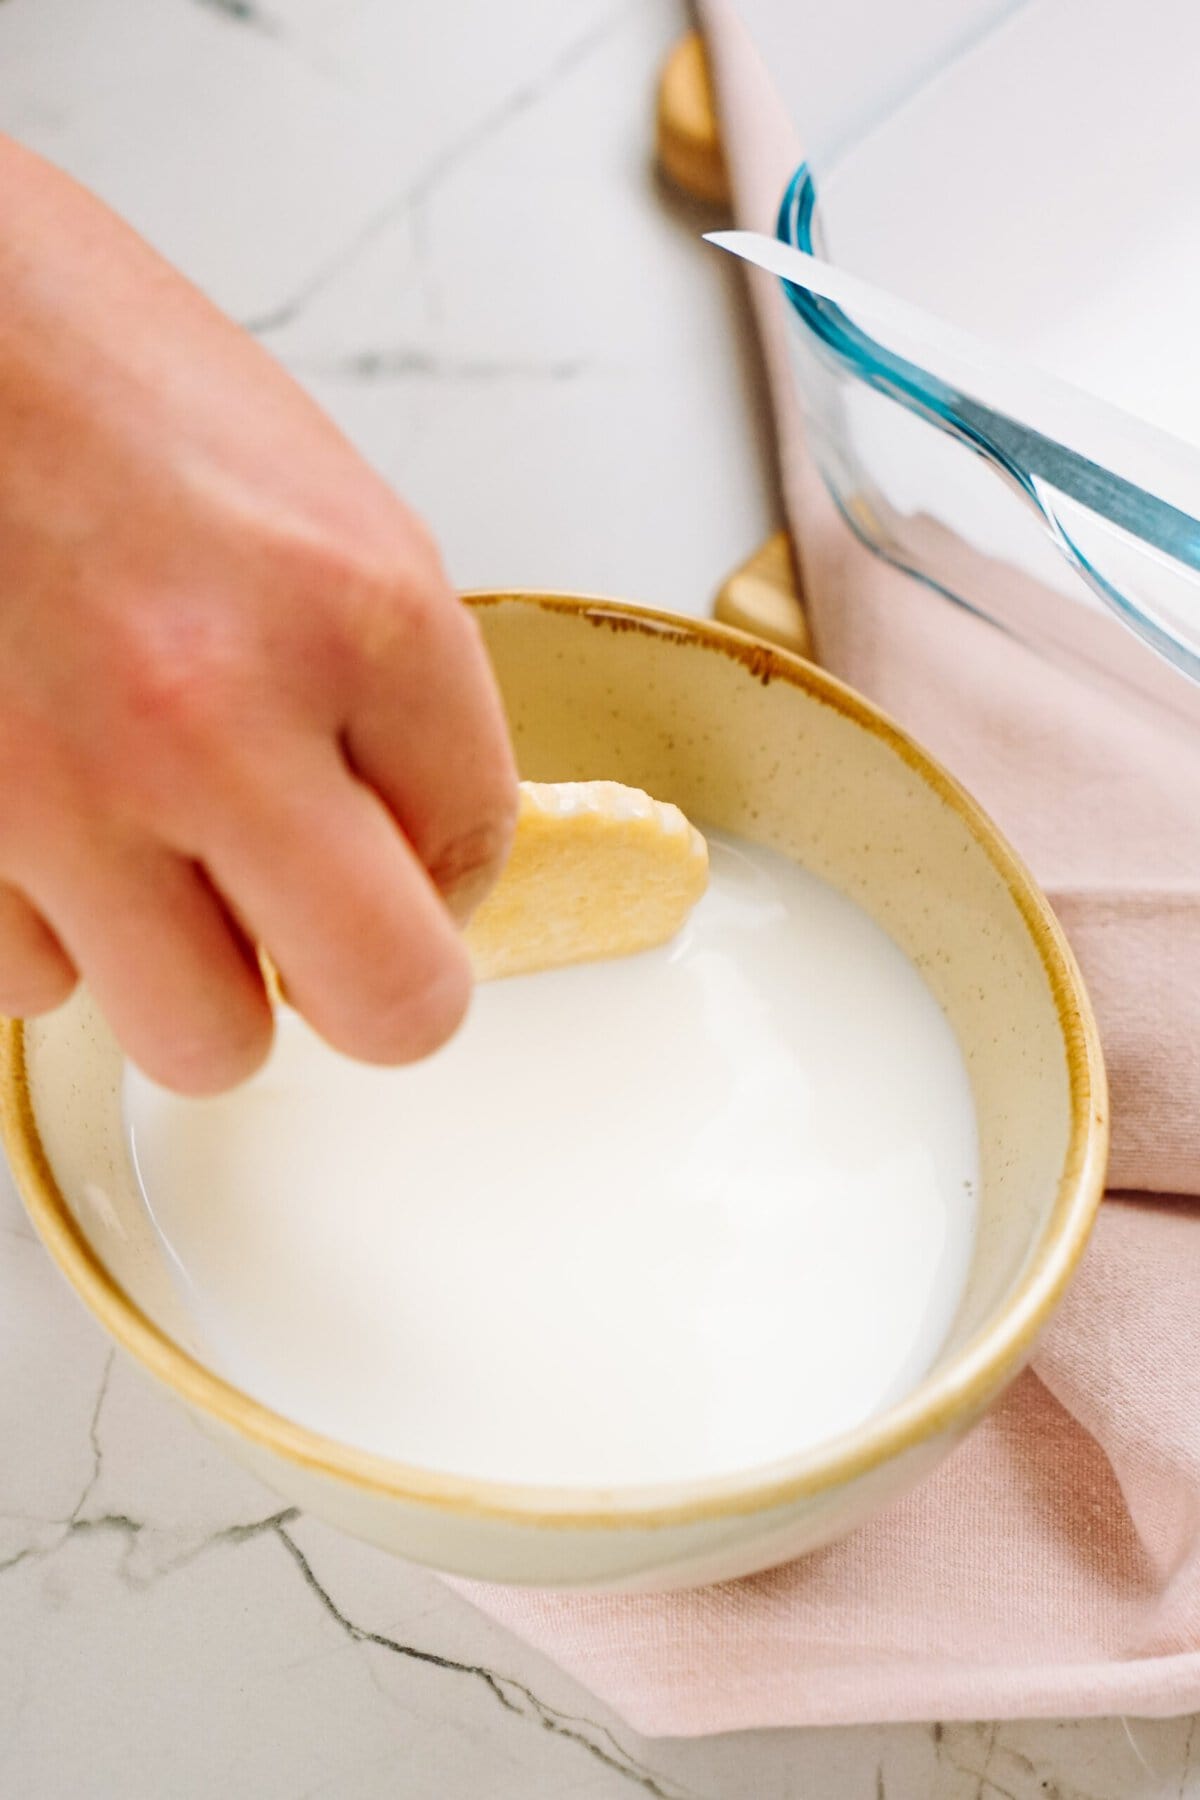 Dipping a cookie into a bowl of milk.